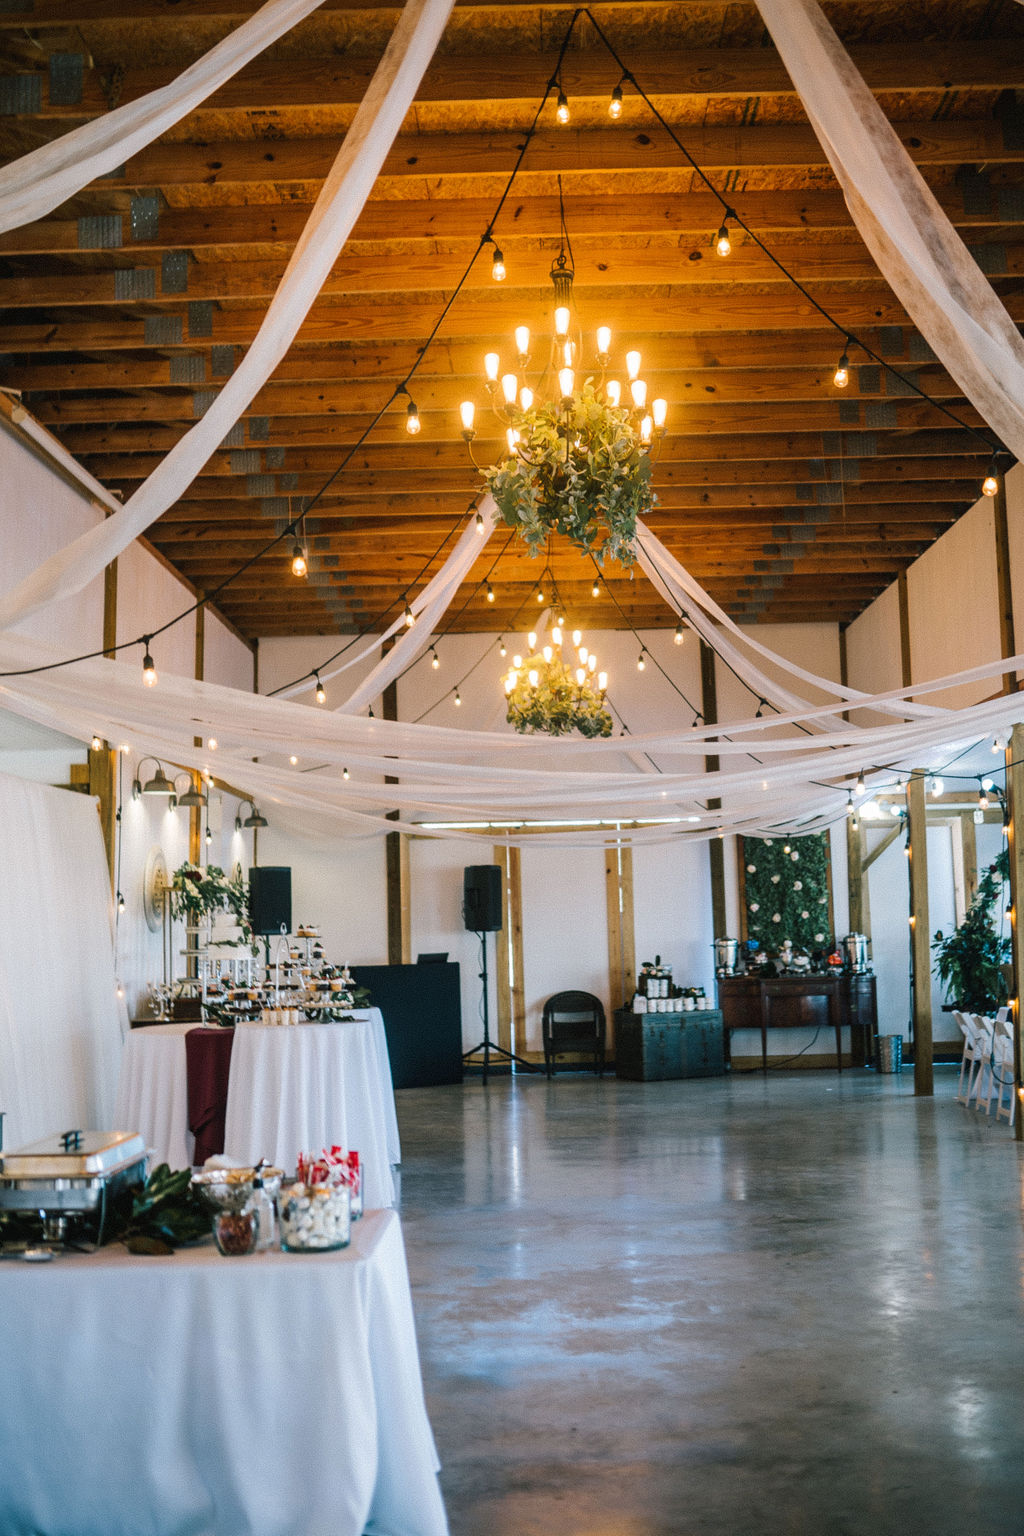 Wedding Photographers Sacramento capture beautiful barn wedding venue with wooden ceiling and chandeliers decorated with draped fabric and Edison bulb strings of lights